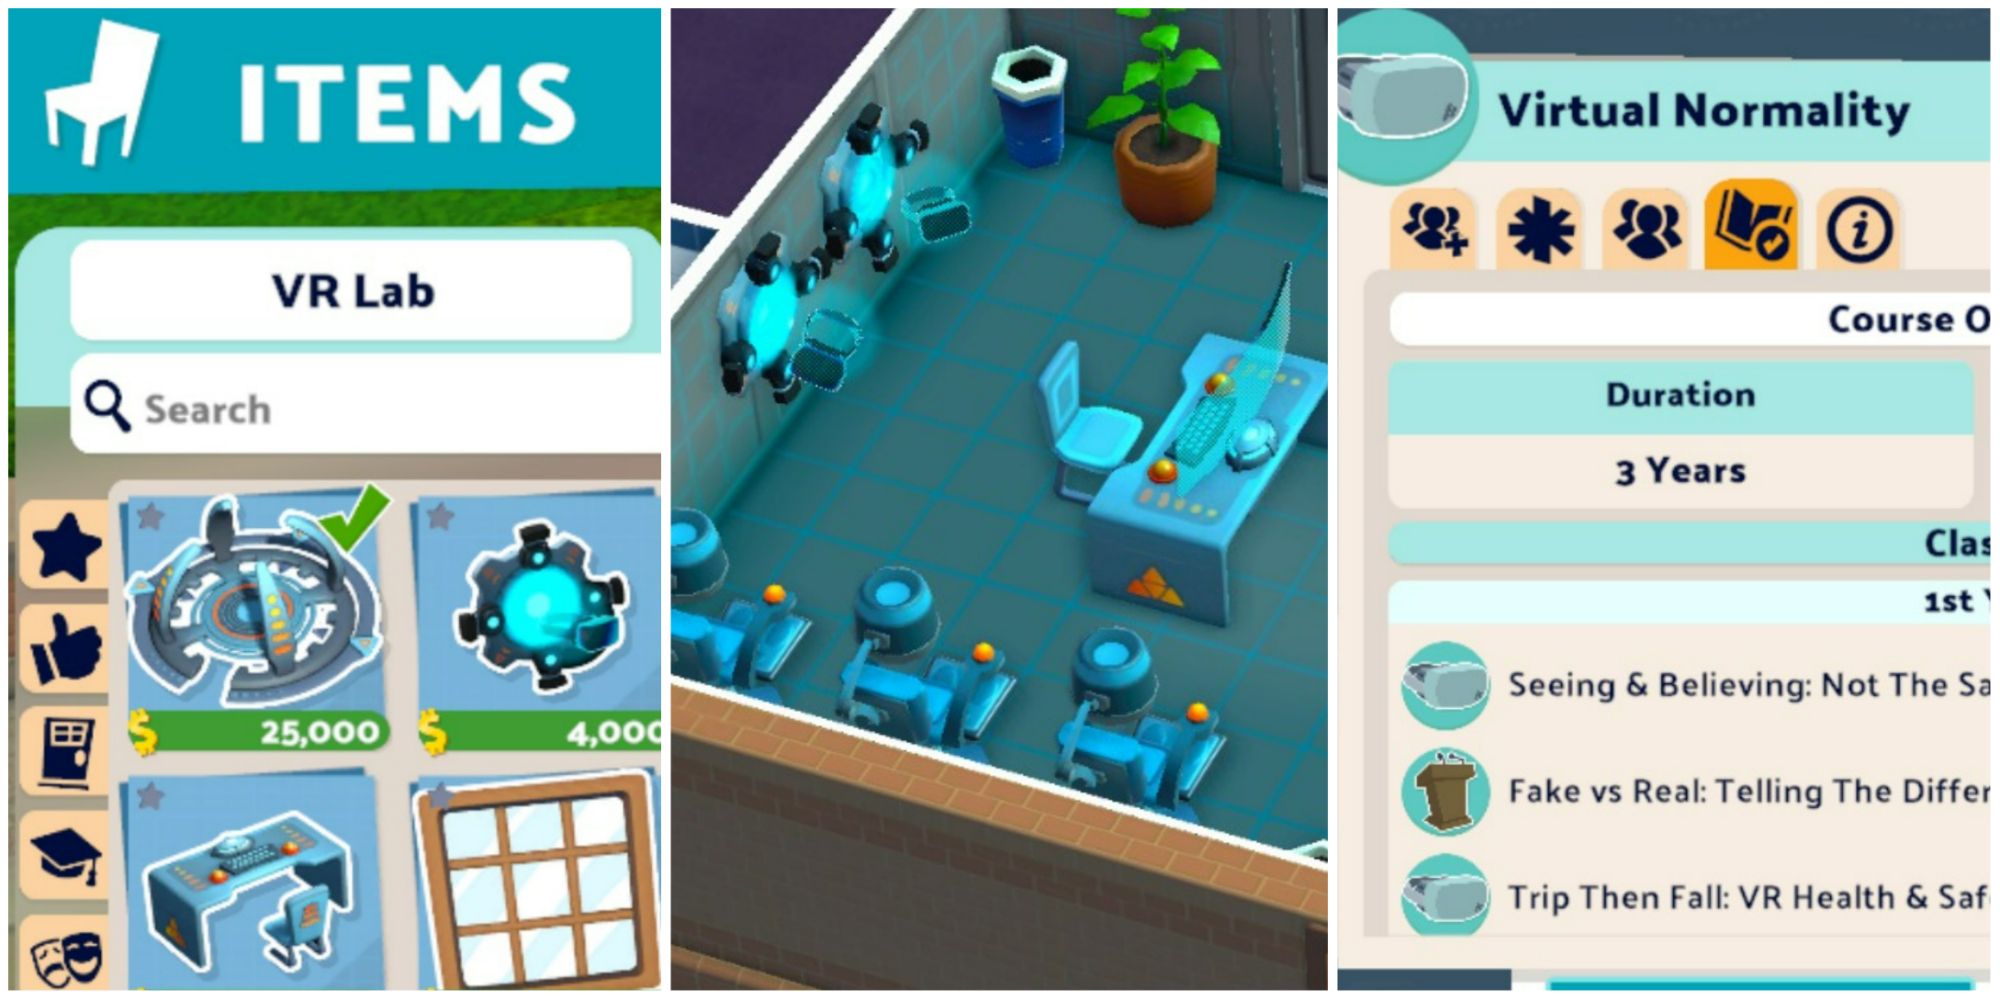 Two Point Campus - split feature image featuring screenshots of the VR Lab items window, a VR Lab, and the Virtual Normality course overview